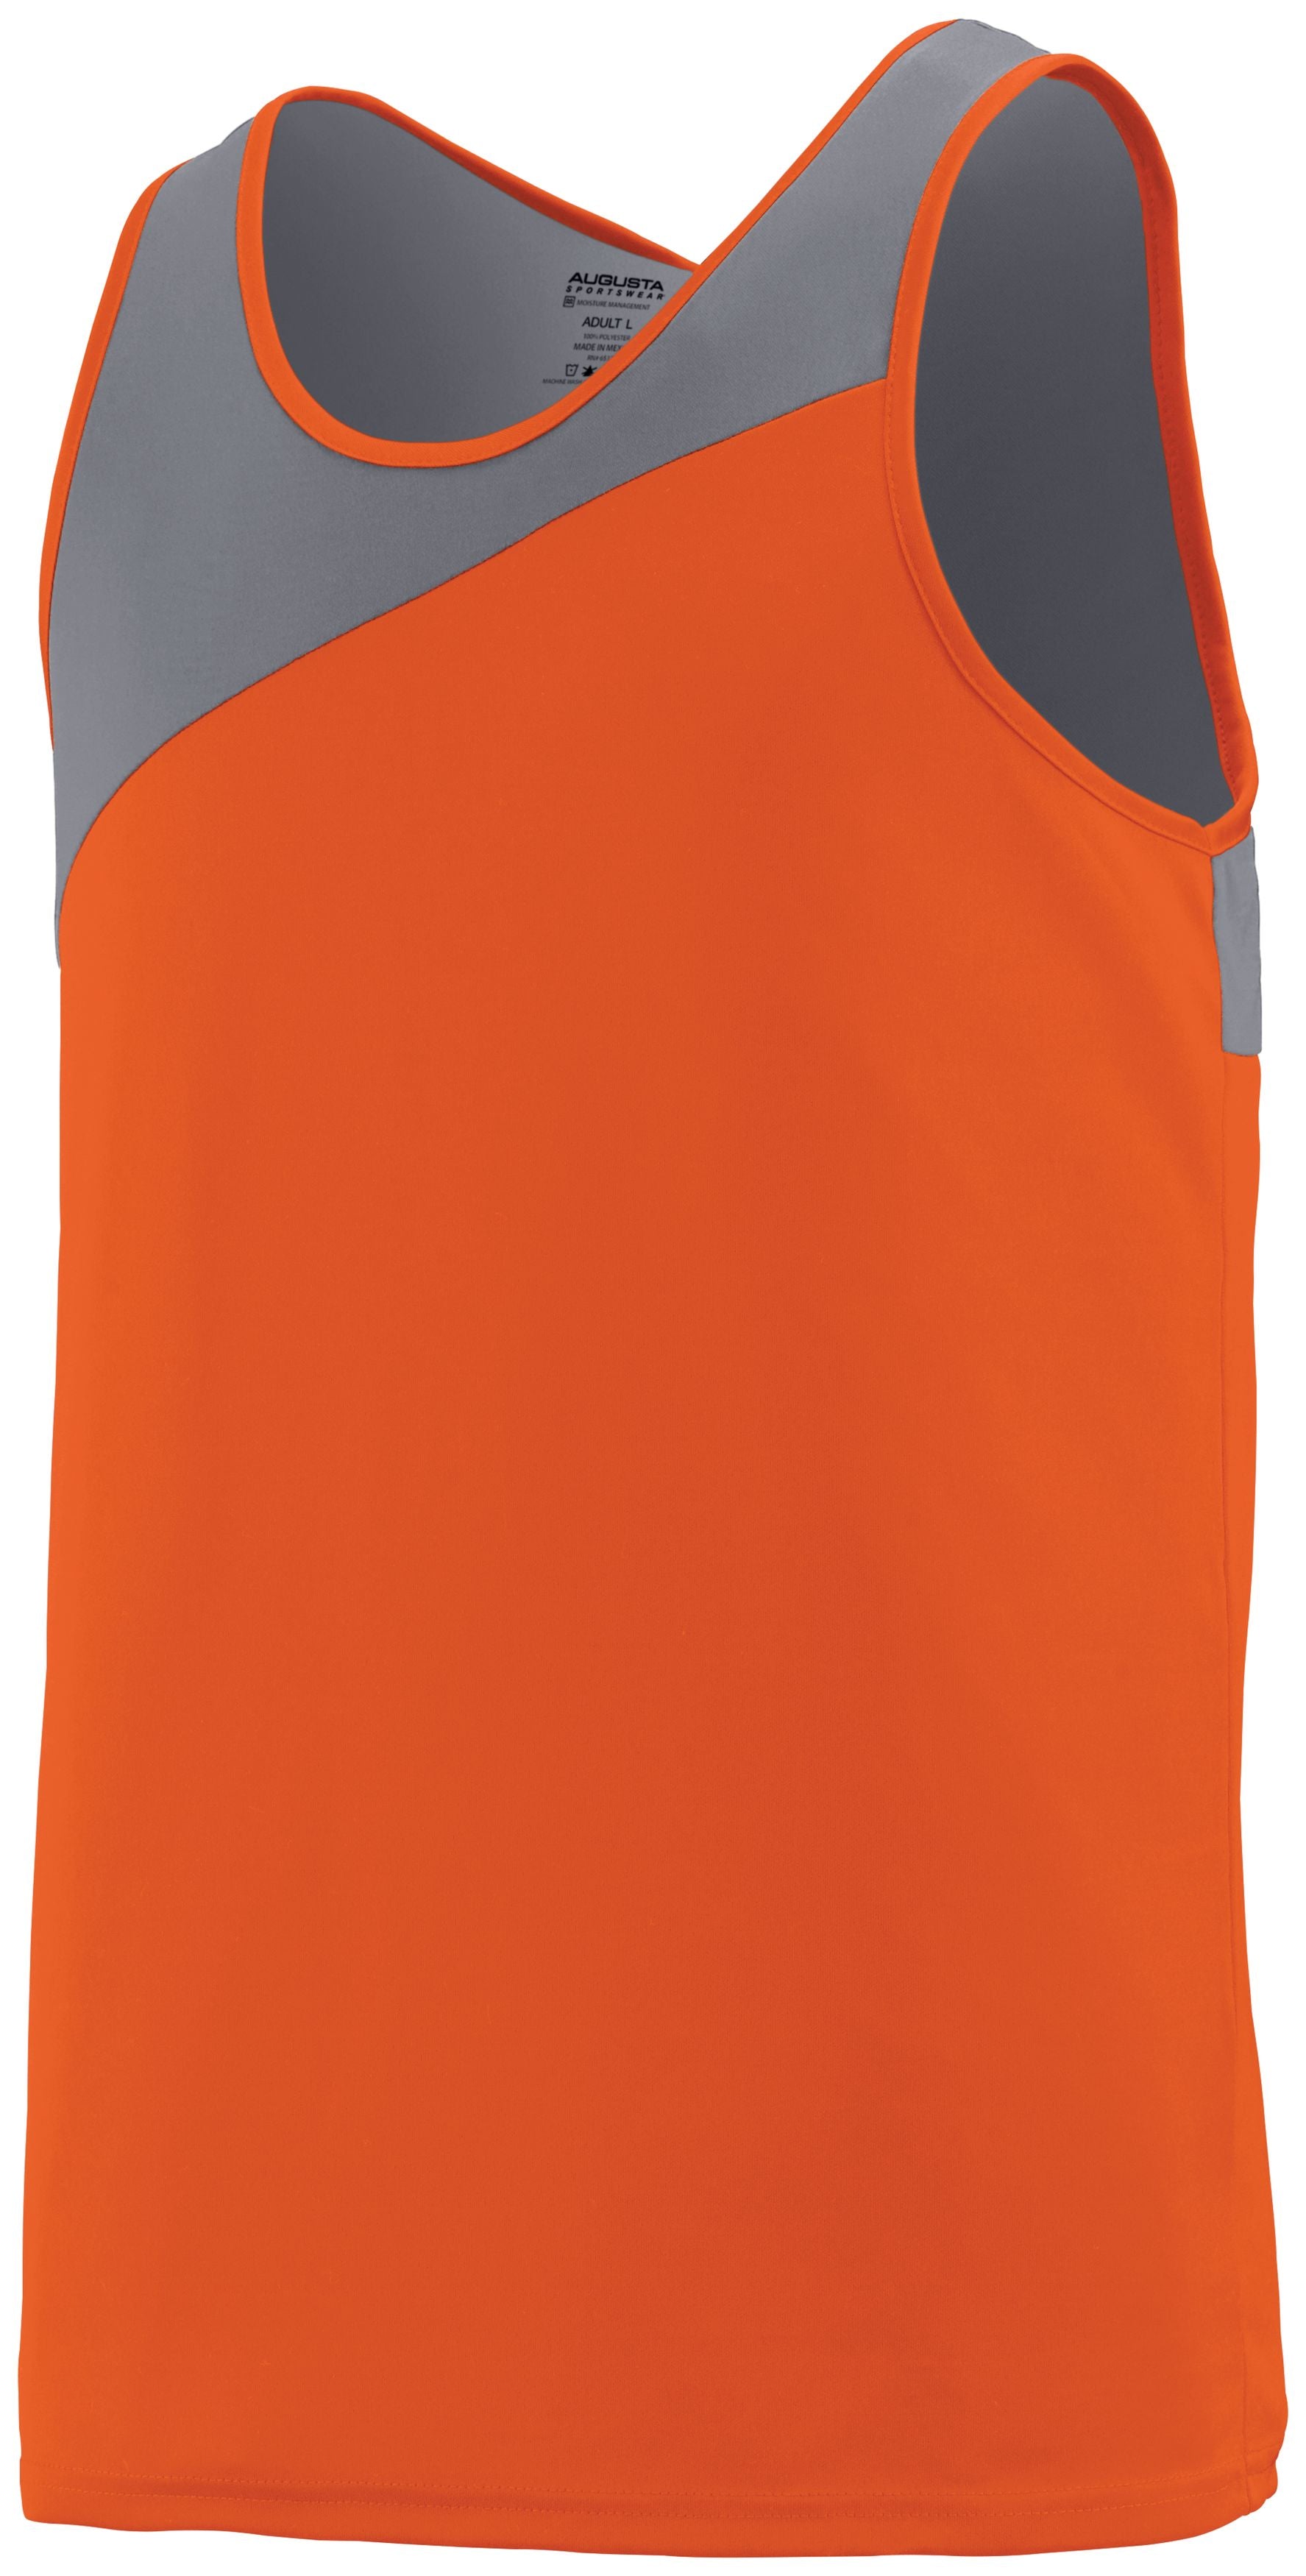 Augusta Sportswear Accelerate Jersey in Orange/Graphite  -Part of the Adult, Adult-Jersey, Augusta-Products, Track-Field, Shirts product lines at KanaleyCreations.com